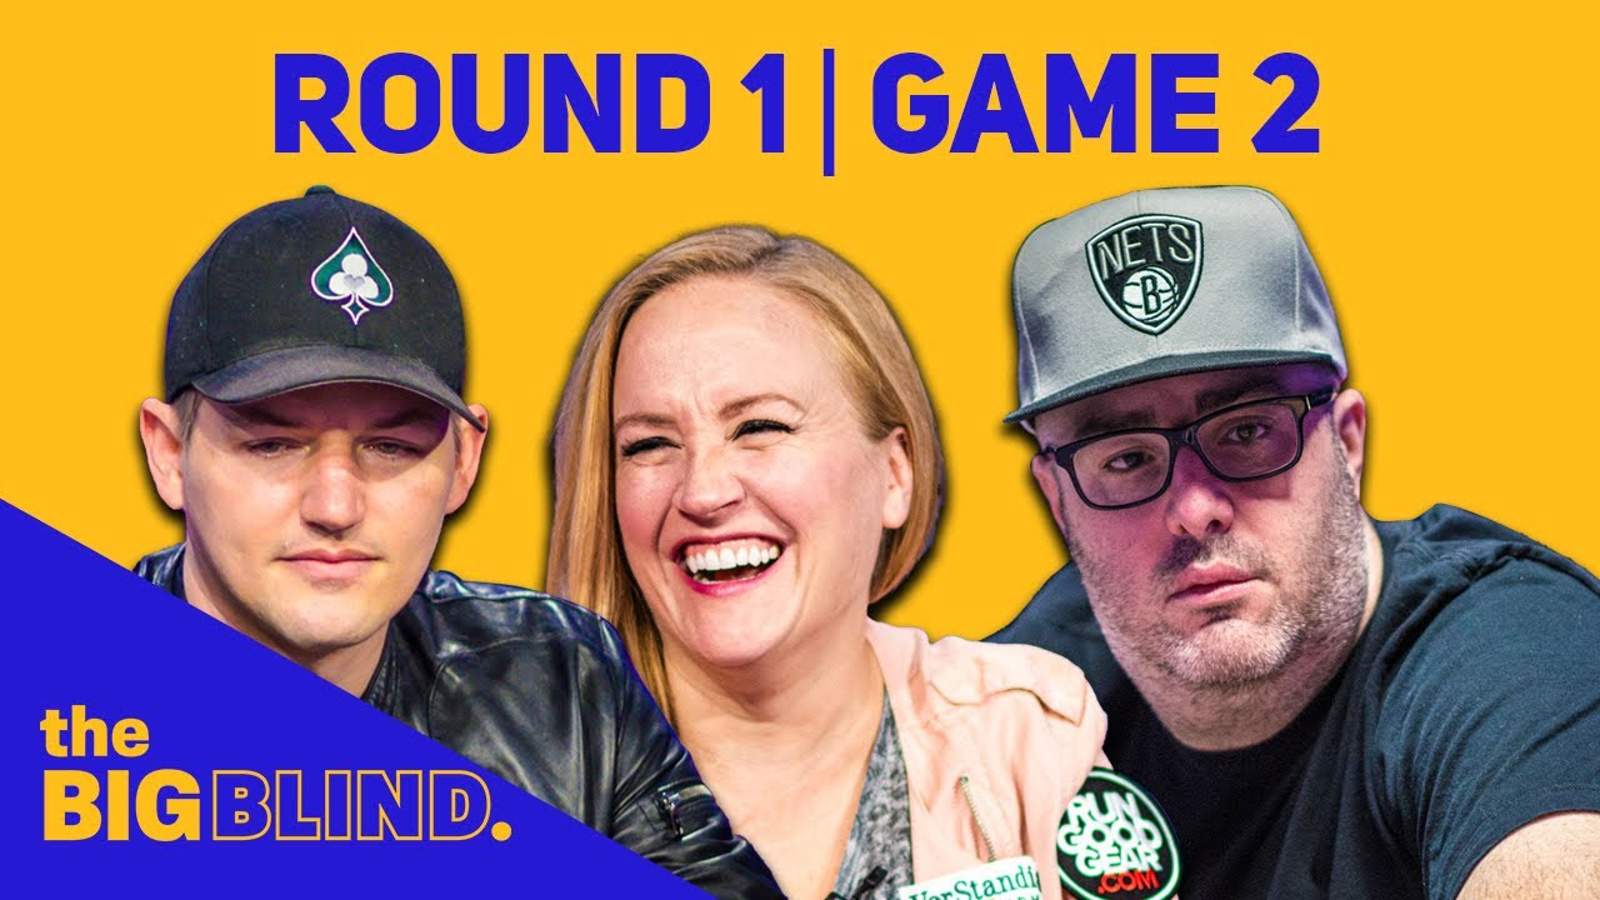 Rewatch Round 1 - Game 2 of The Big Blind on YouTube and Facebook